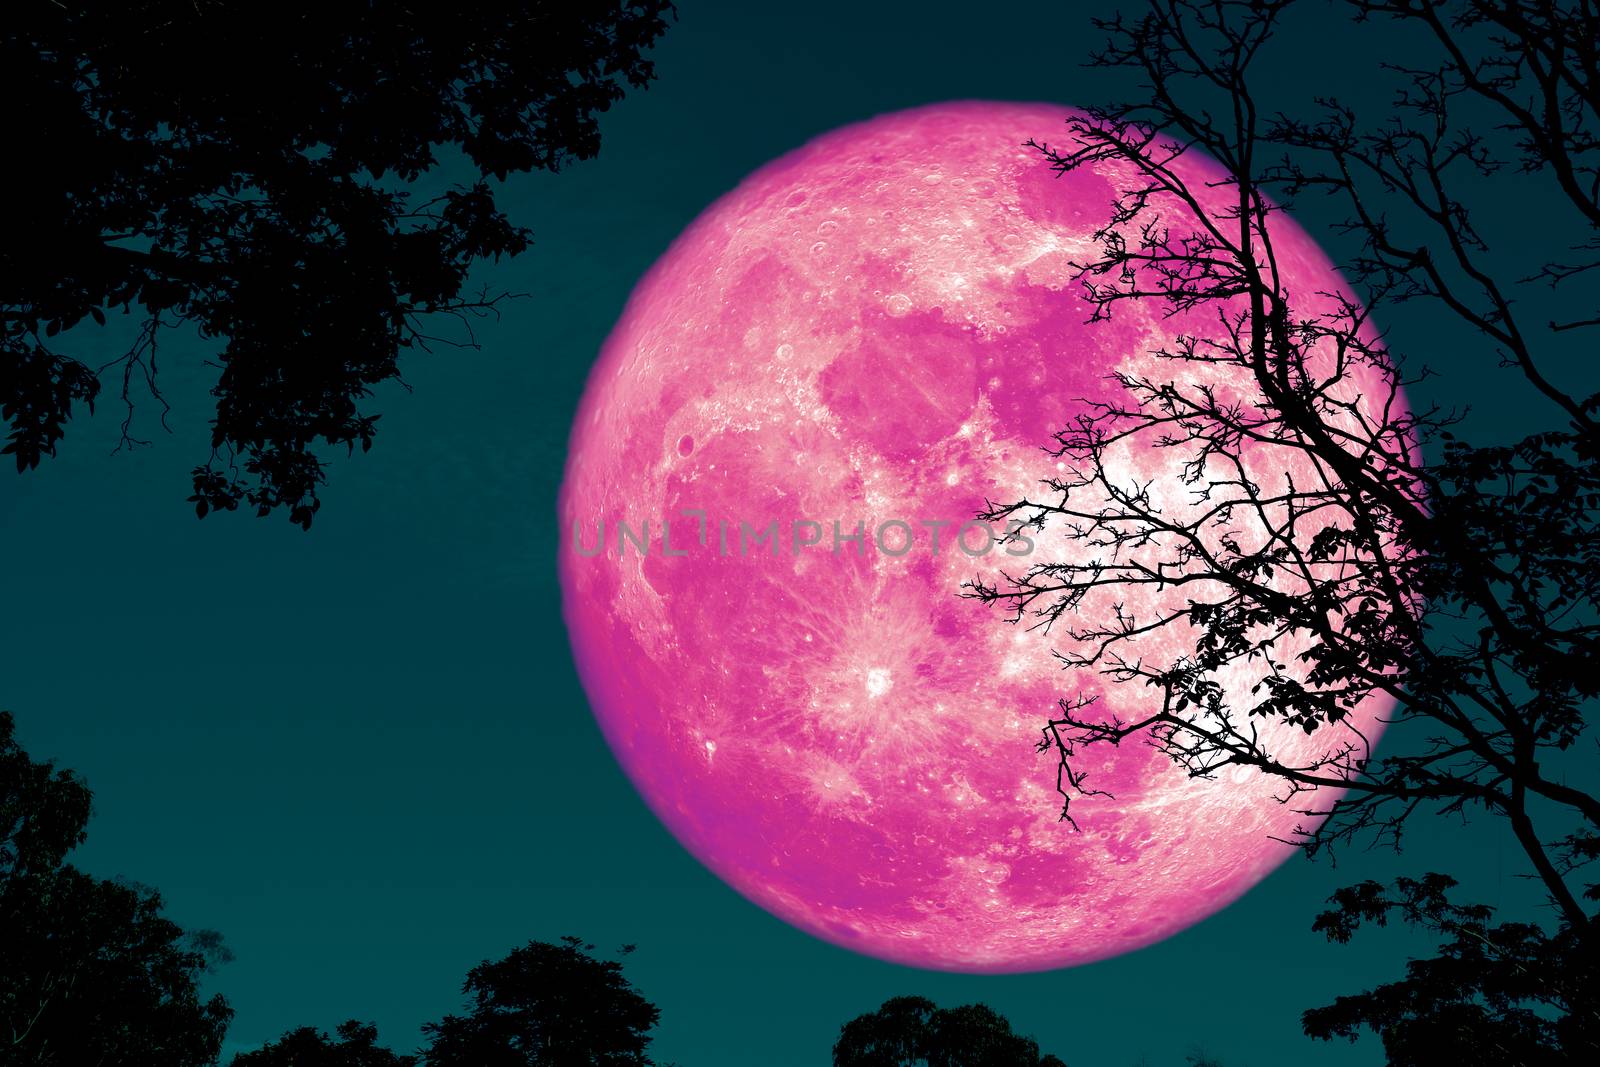 full crust moon back on silhouette plant and trees on night sky, Elements of this image furnished by NASA